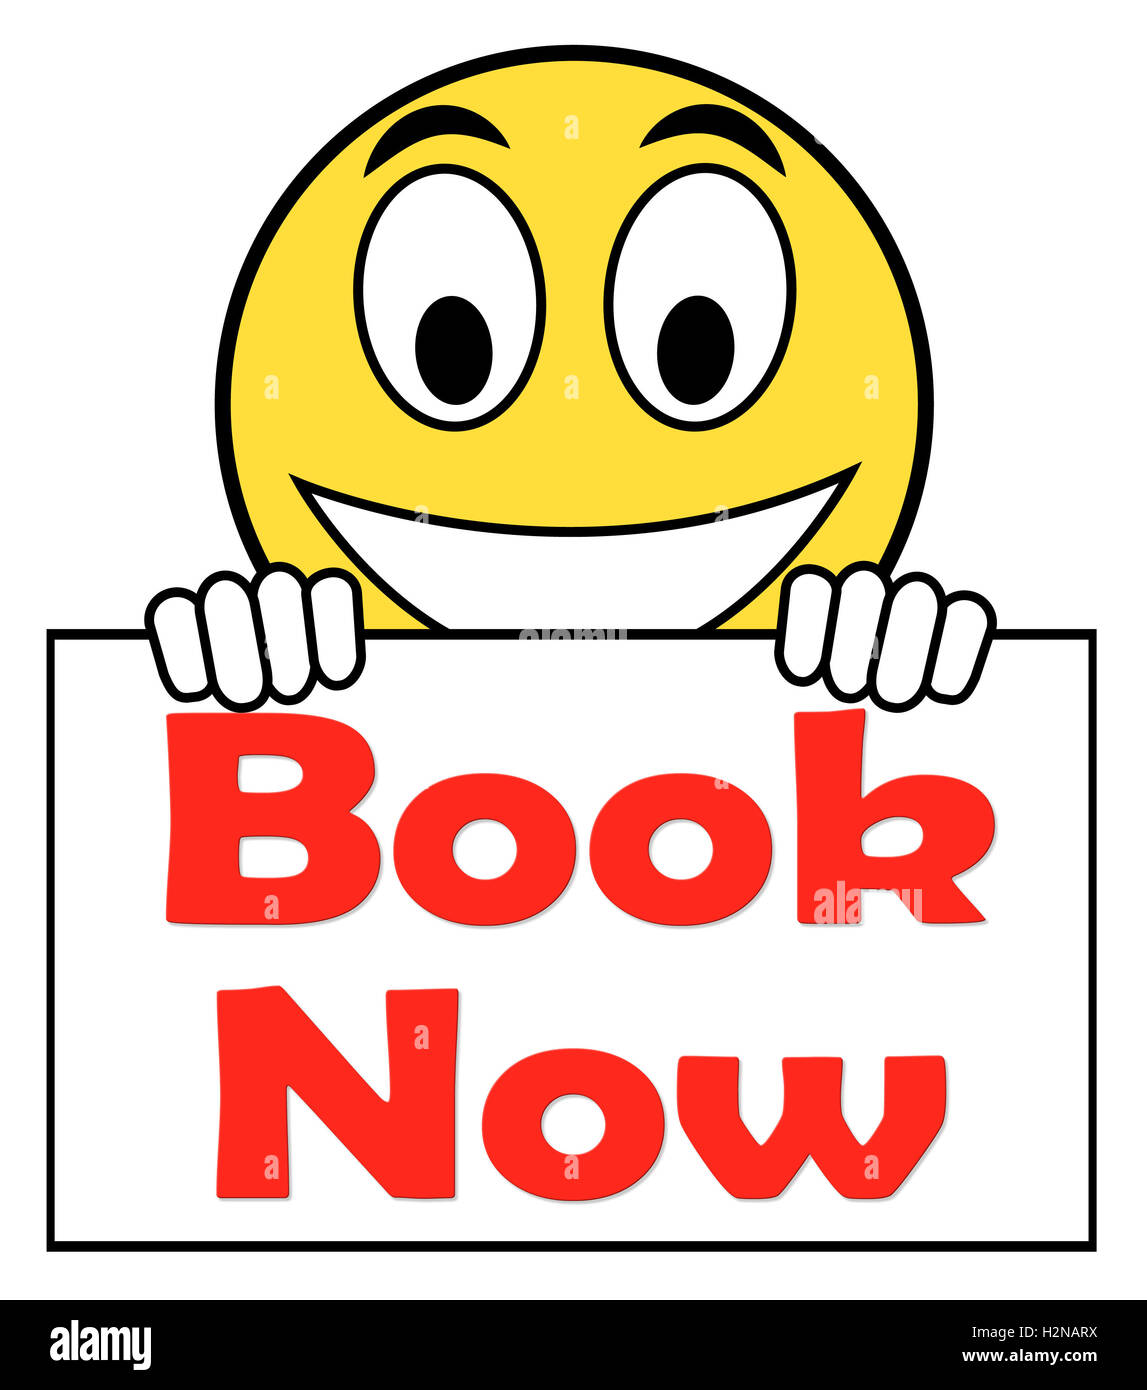 Book Now On Sign For Hotel Or Flight Reservation Stock Photo